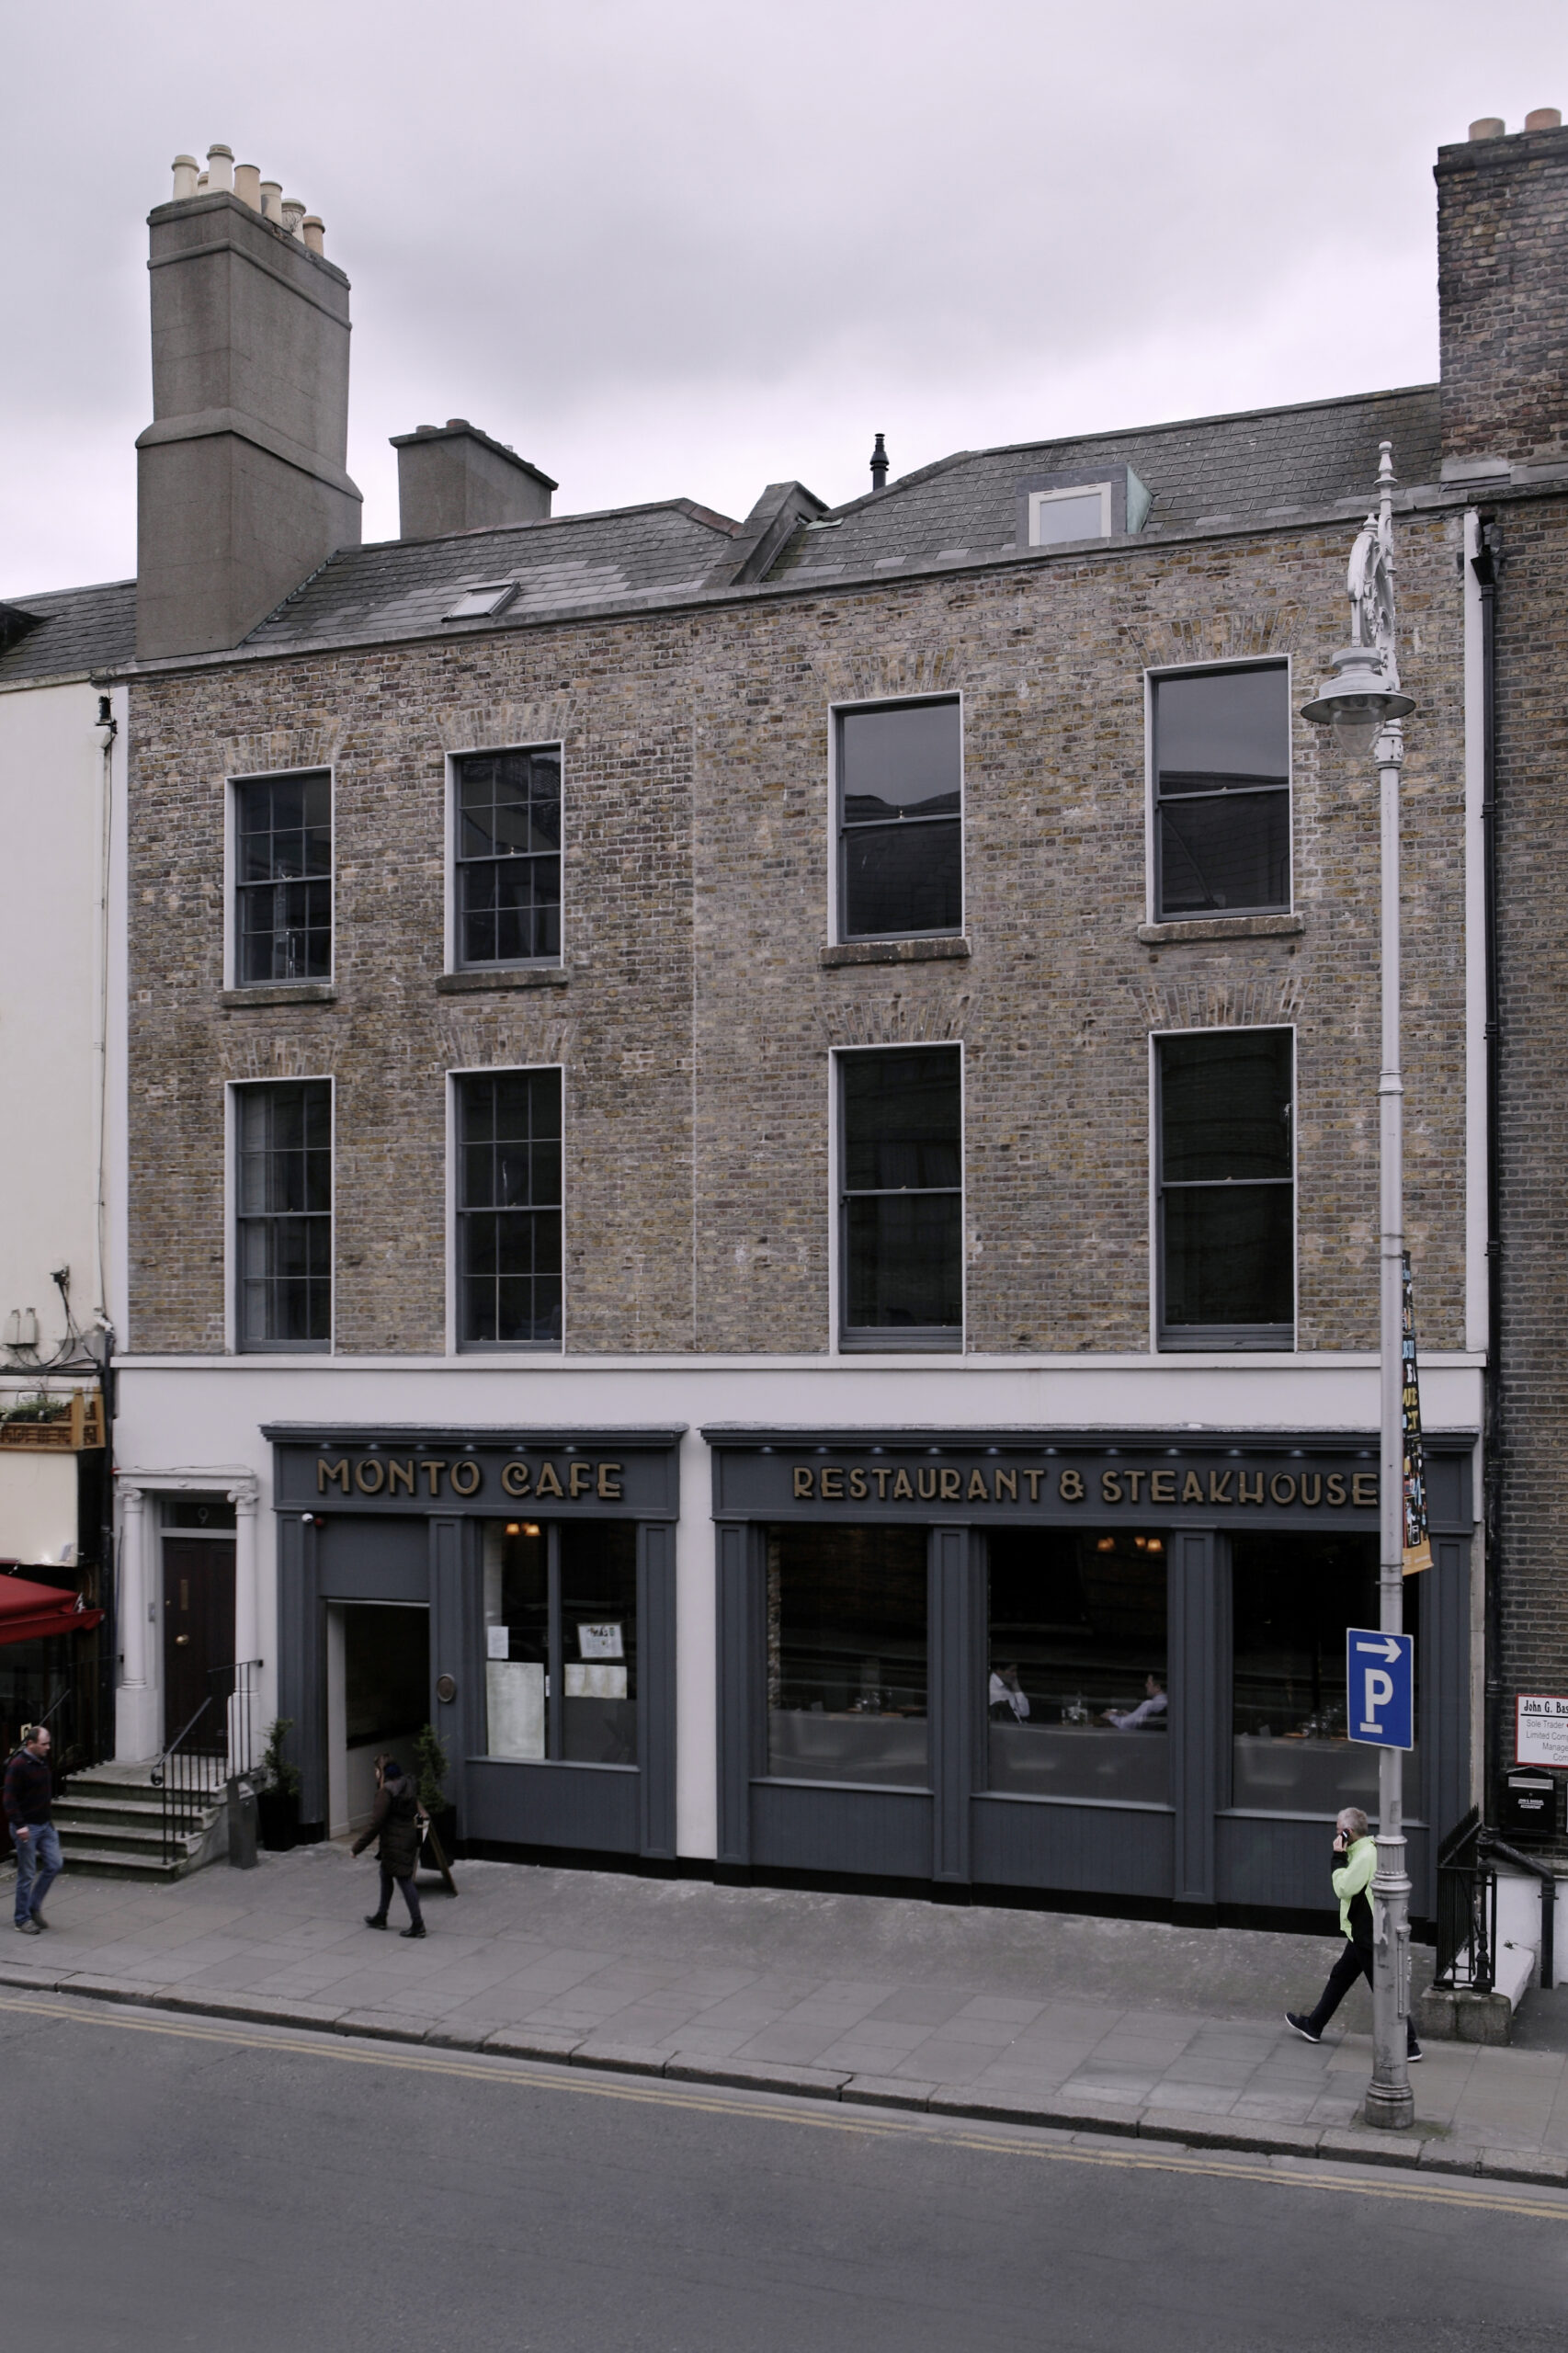 Street view of three storey building with pub on the ground floor.